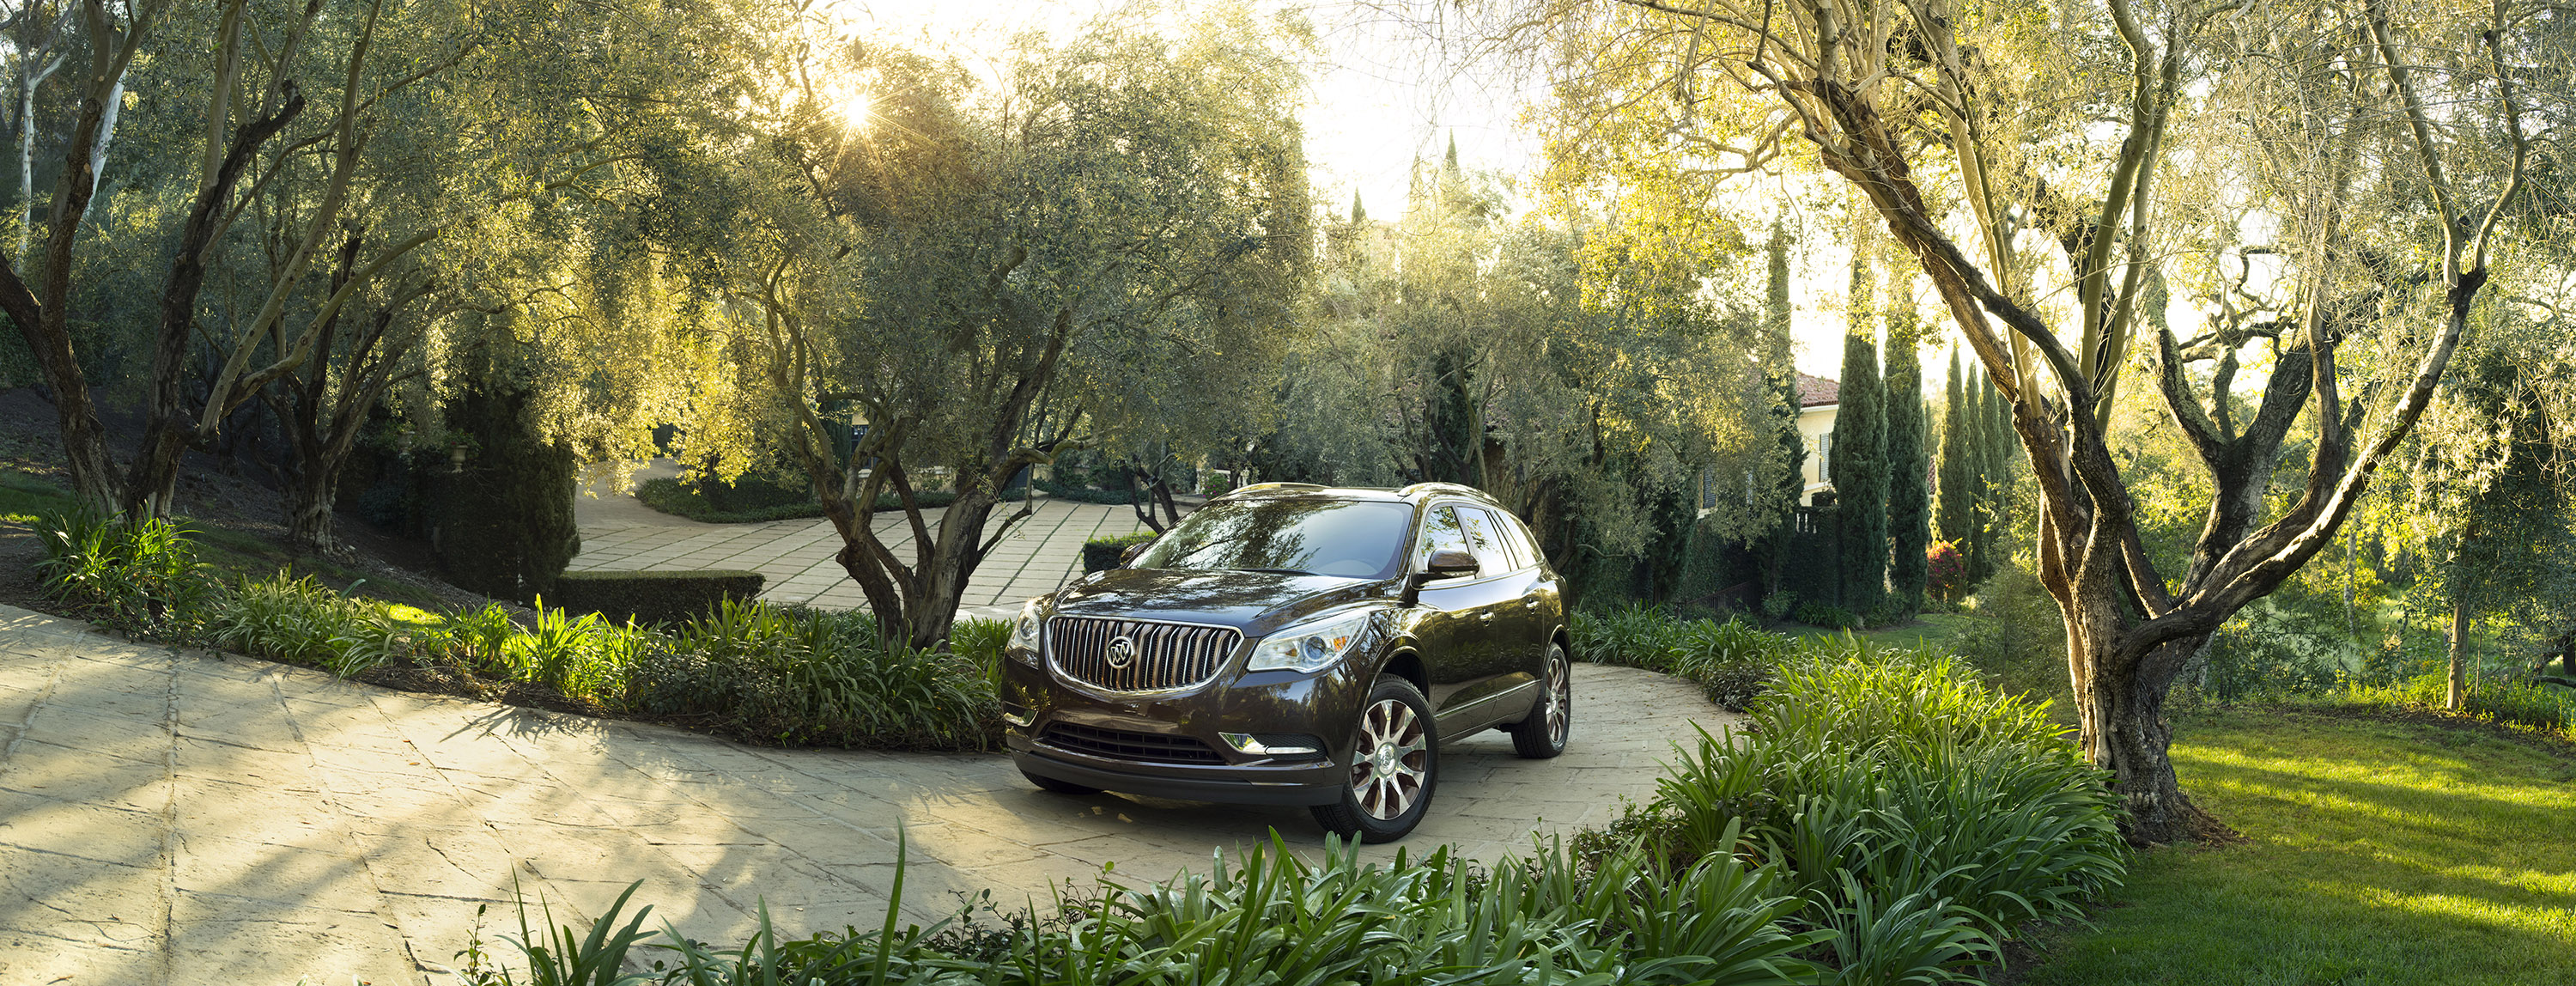 Buick Enclave Tuscan Edition